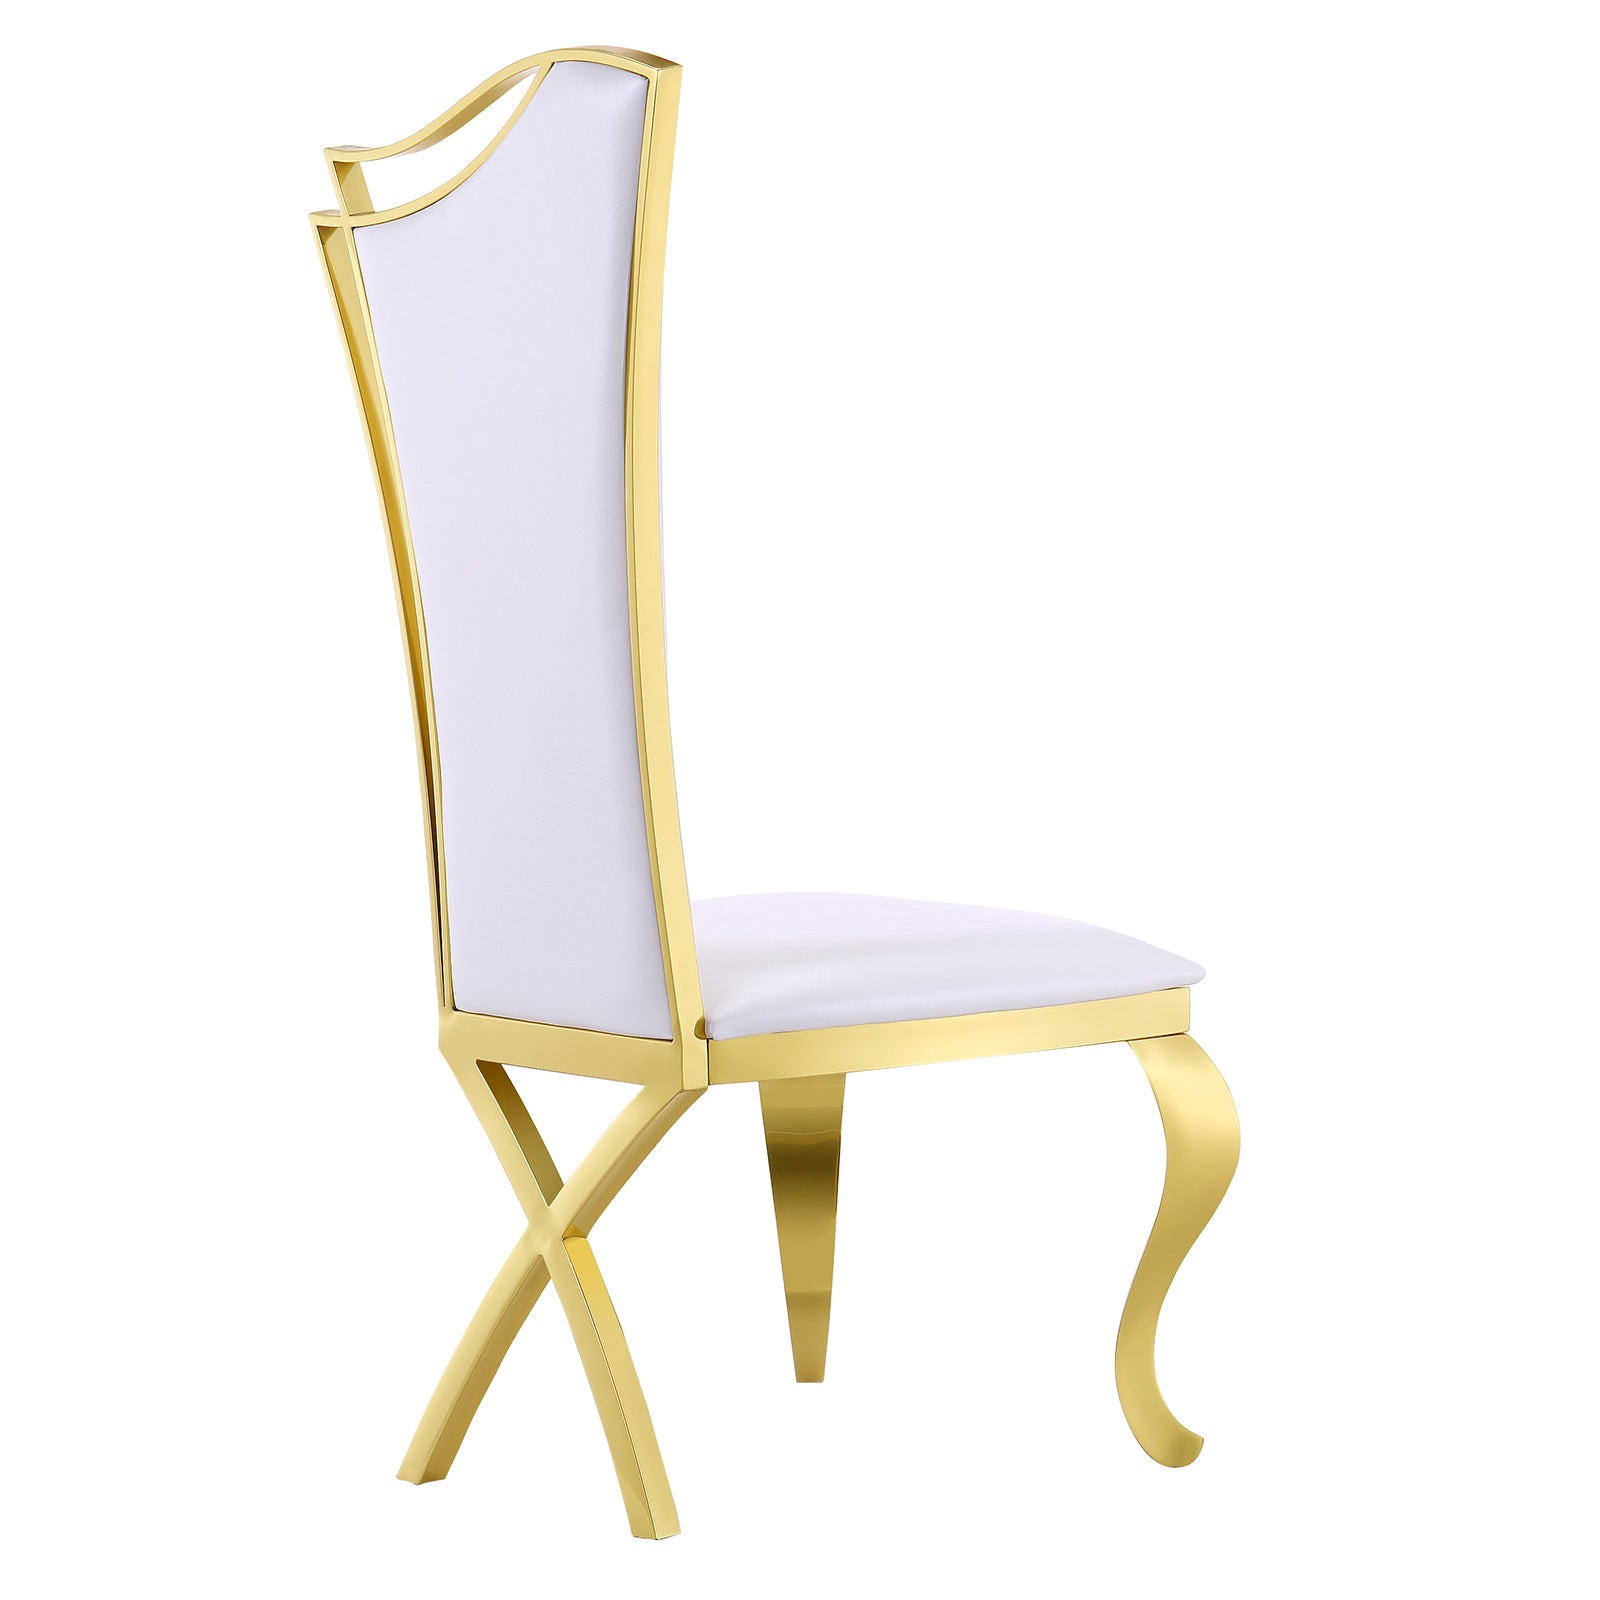 605-Set | AUZ White and Gold Dining room Sets for 6